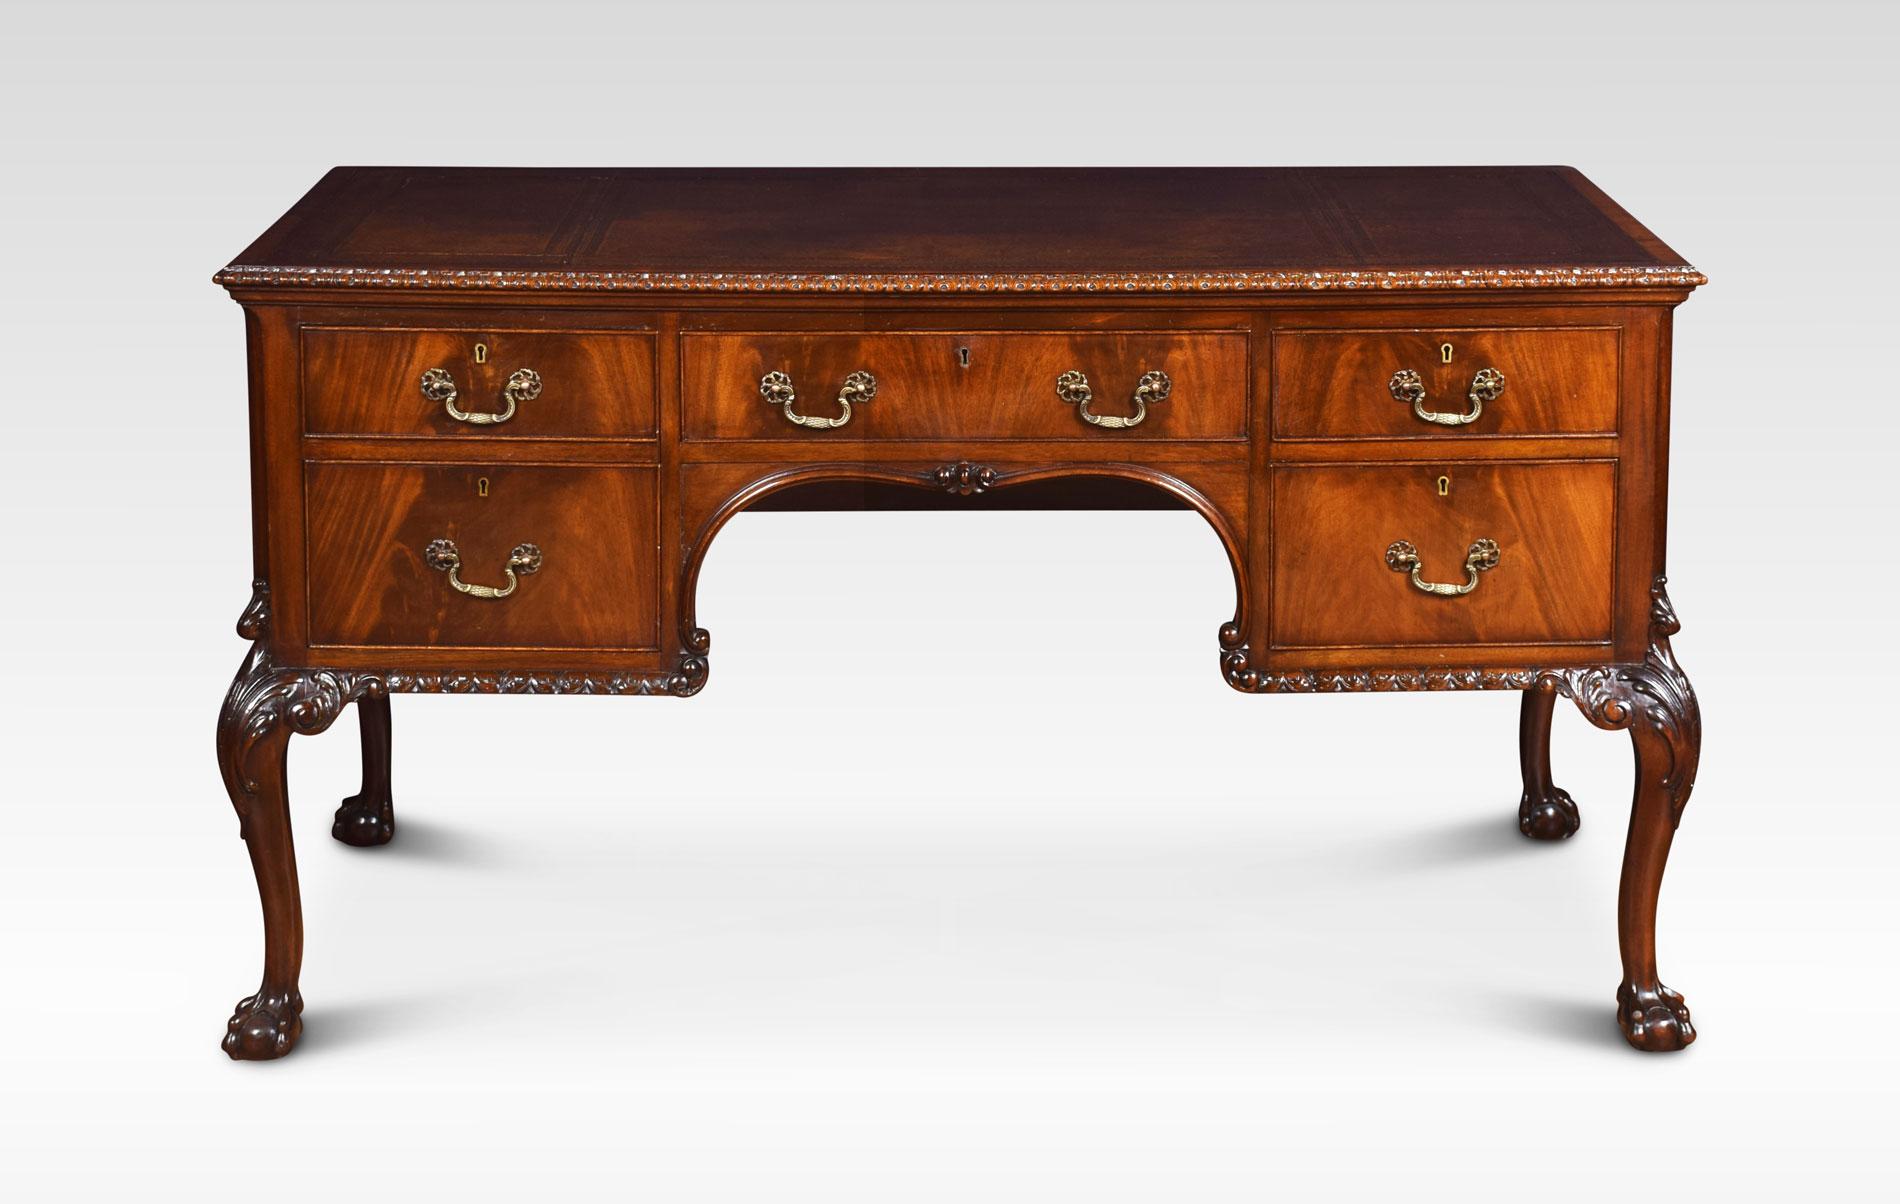 Mahogany writing desk, of Chippendale design, the inset tooled leather writing surface, within an egg and dart border. Above central frieze drawer flanked by two further drawers to each side. All raised up on cabriole legs with claw and ball